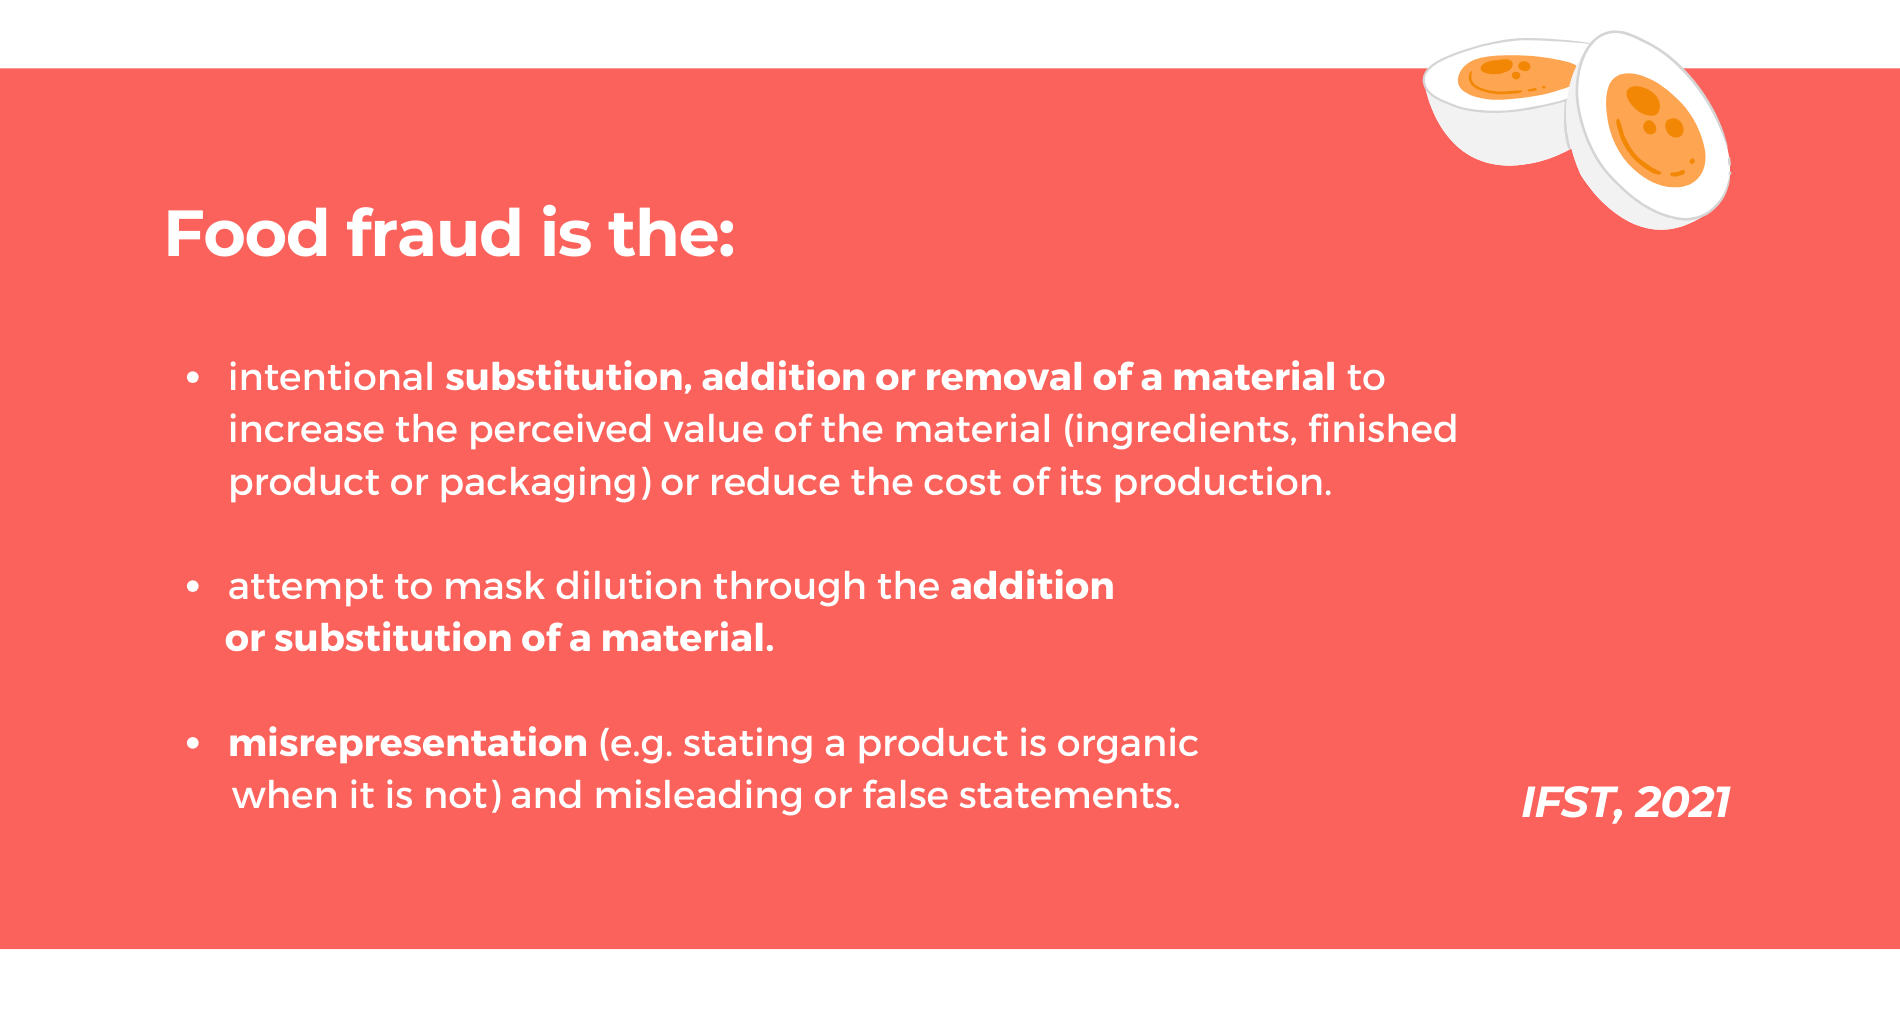 A quote from the IFST: "Food fraud is the: 1) intentional substitution, addition or removal of a material to increase the perceived value of the material (ingredients, finished product or packaging) or reduce the cost of its production. 2) attempt to mask dilution through the addition or substitution of a material. 3) misrepresentation (e.g. stating a product is organic when it is not) and misleading or false statements.